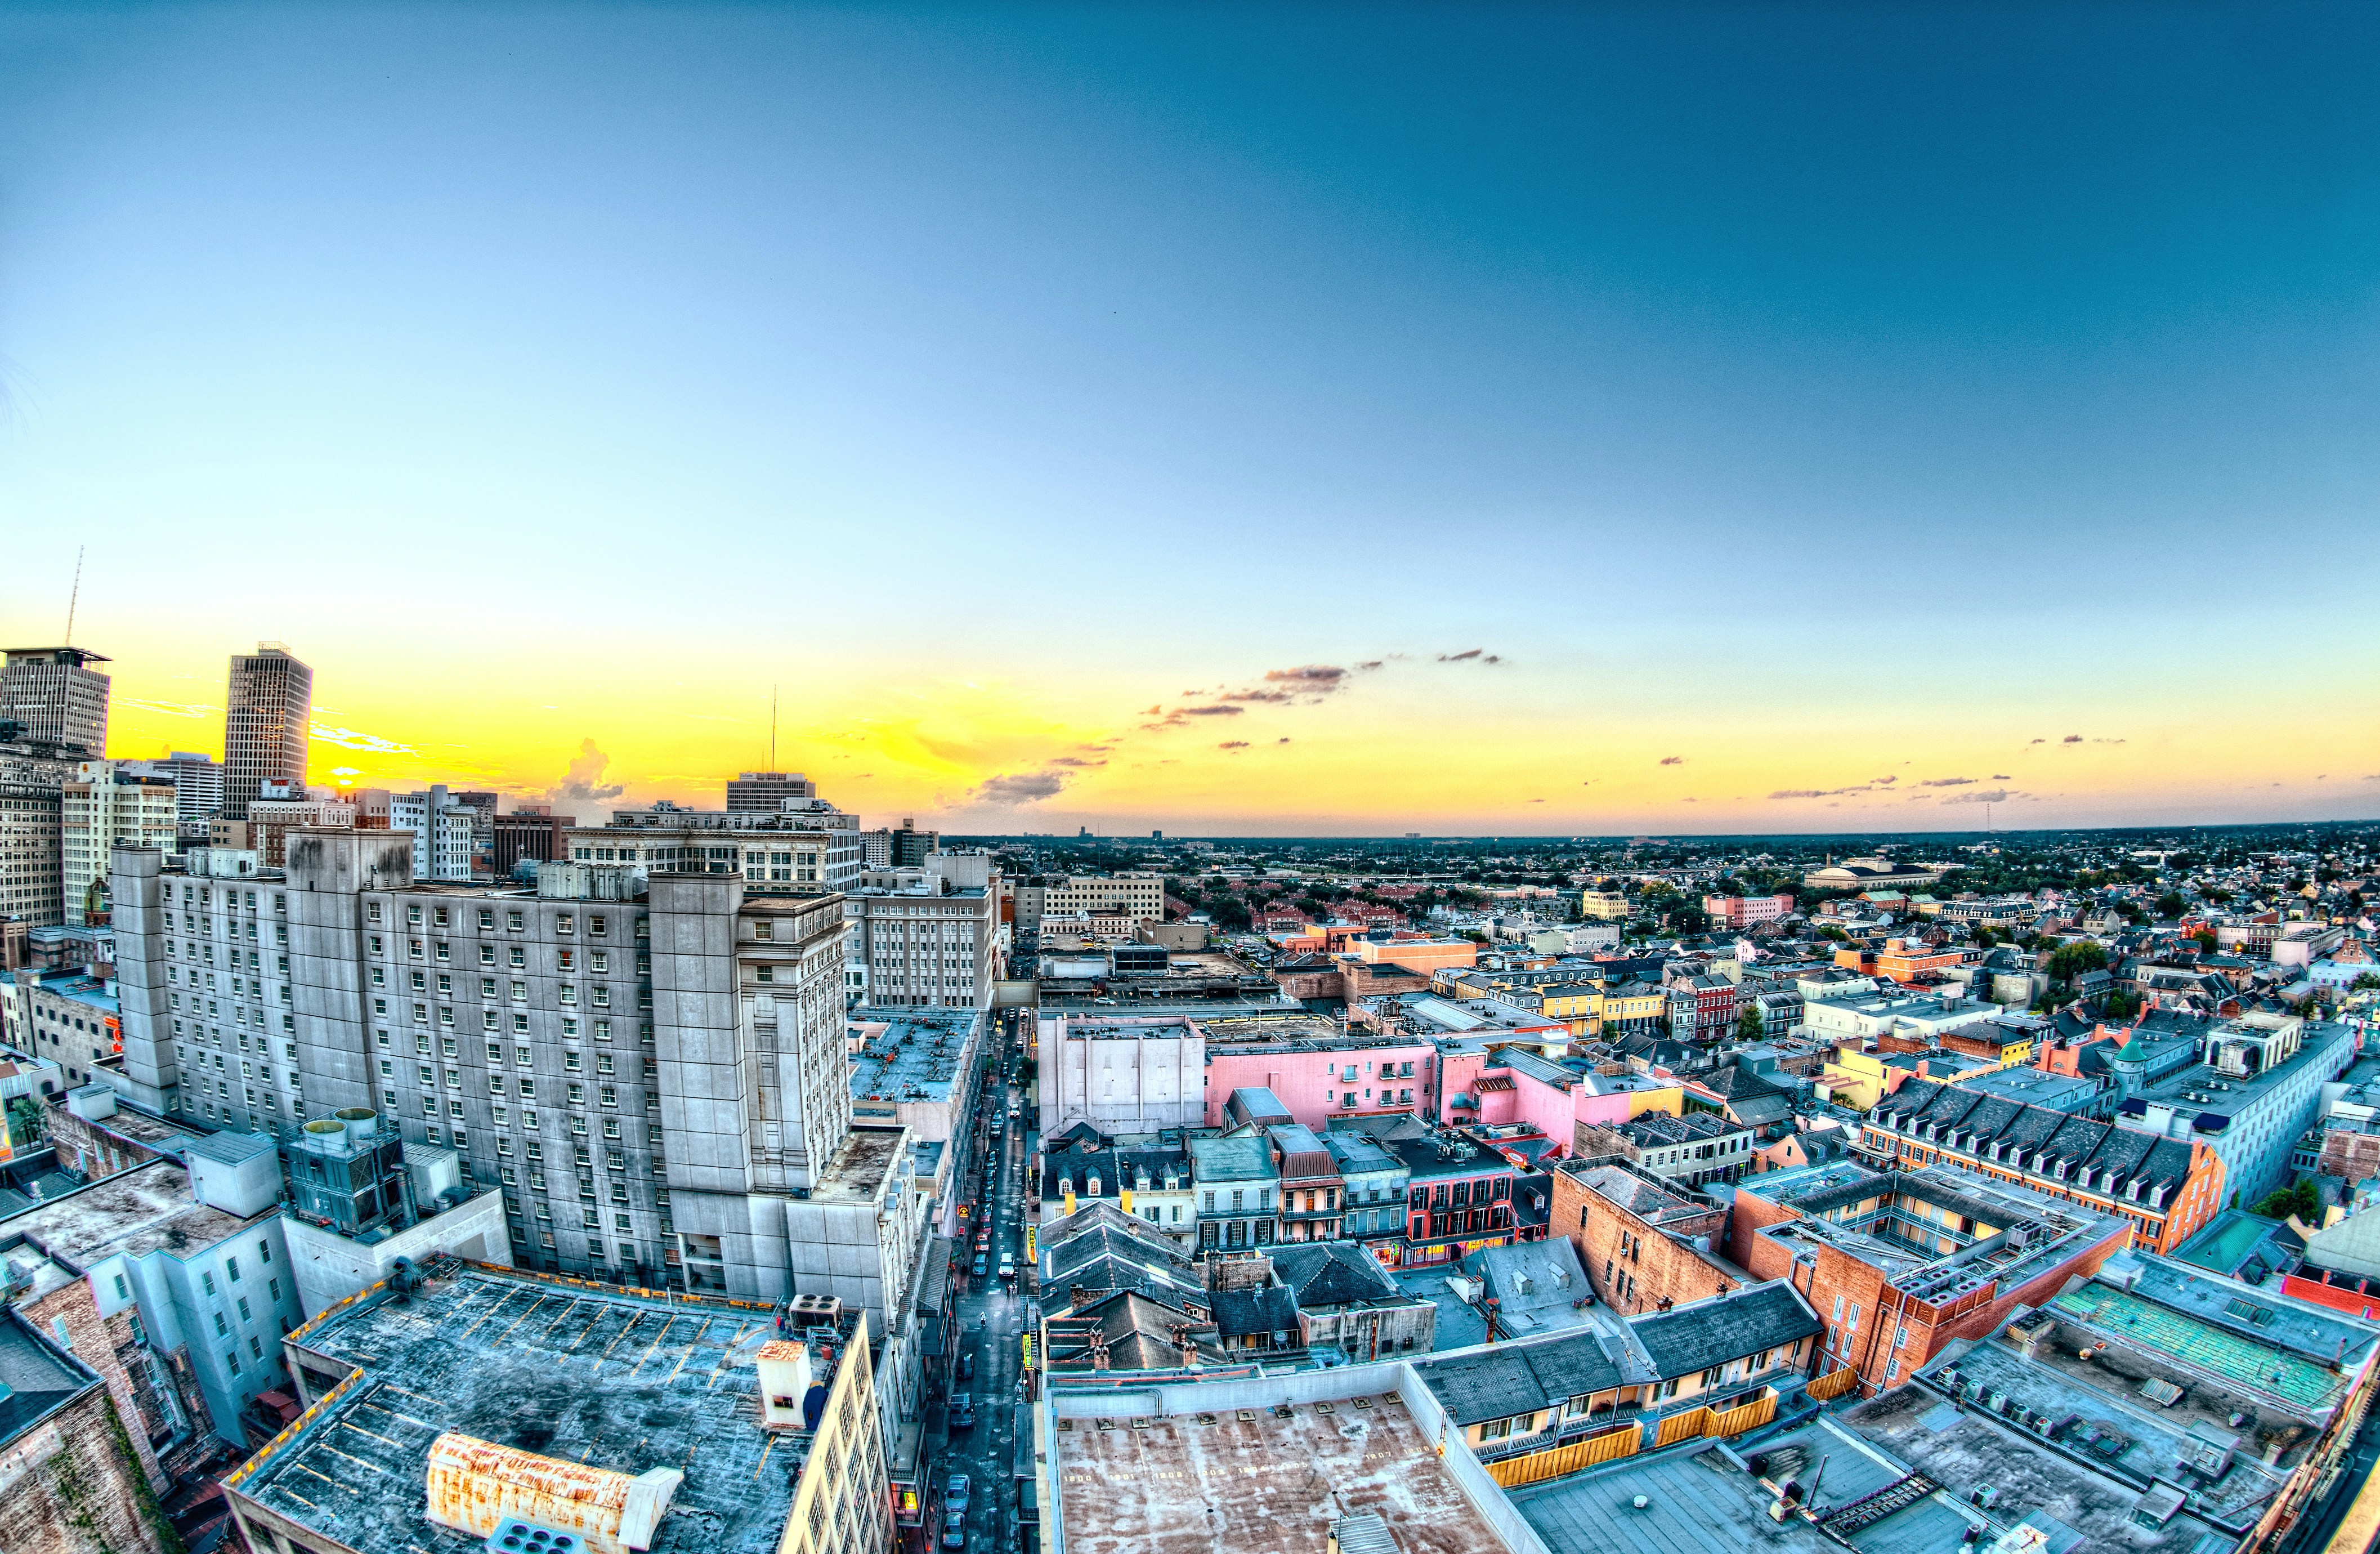 Shot from the top of the Hotel Monteleone at Sunset in New Orleans. This is looking towards Bourbon Street in the French Quarters.